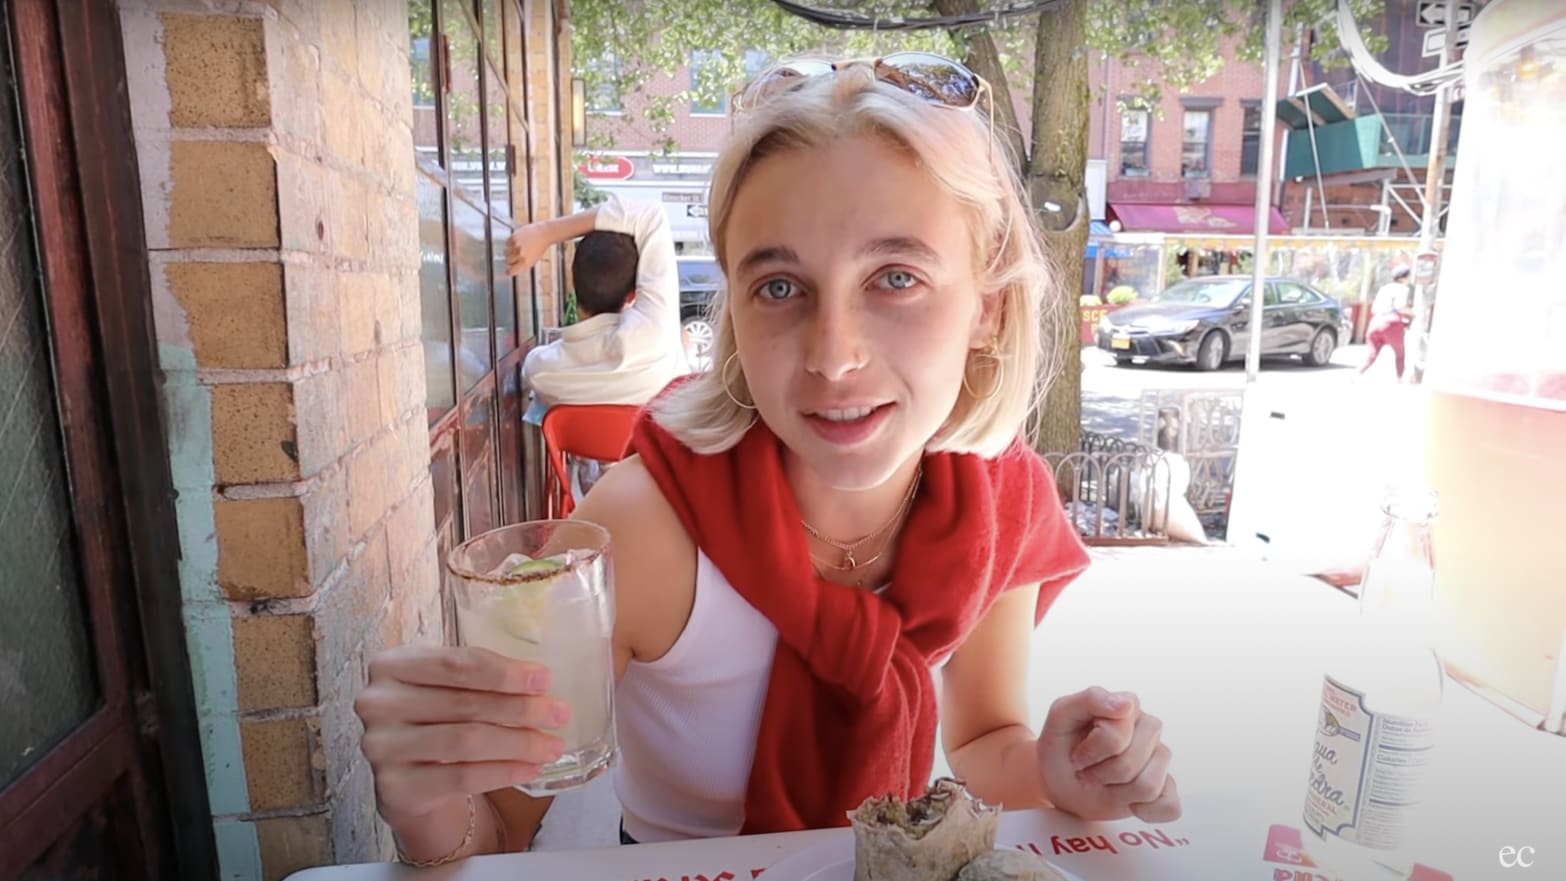 Who is Emma Chamberlain? The vlogger is unabashedly herself online